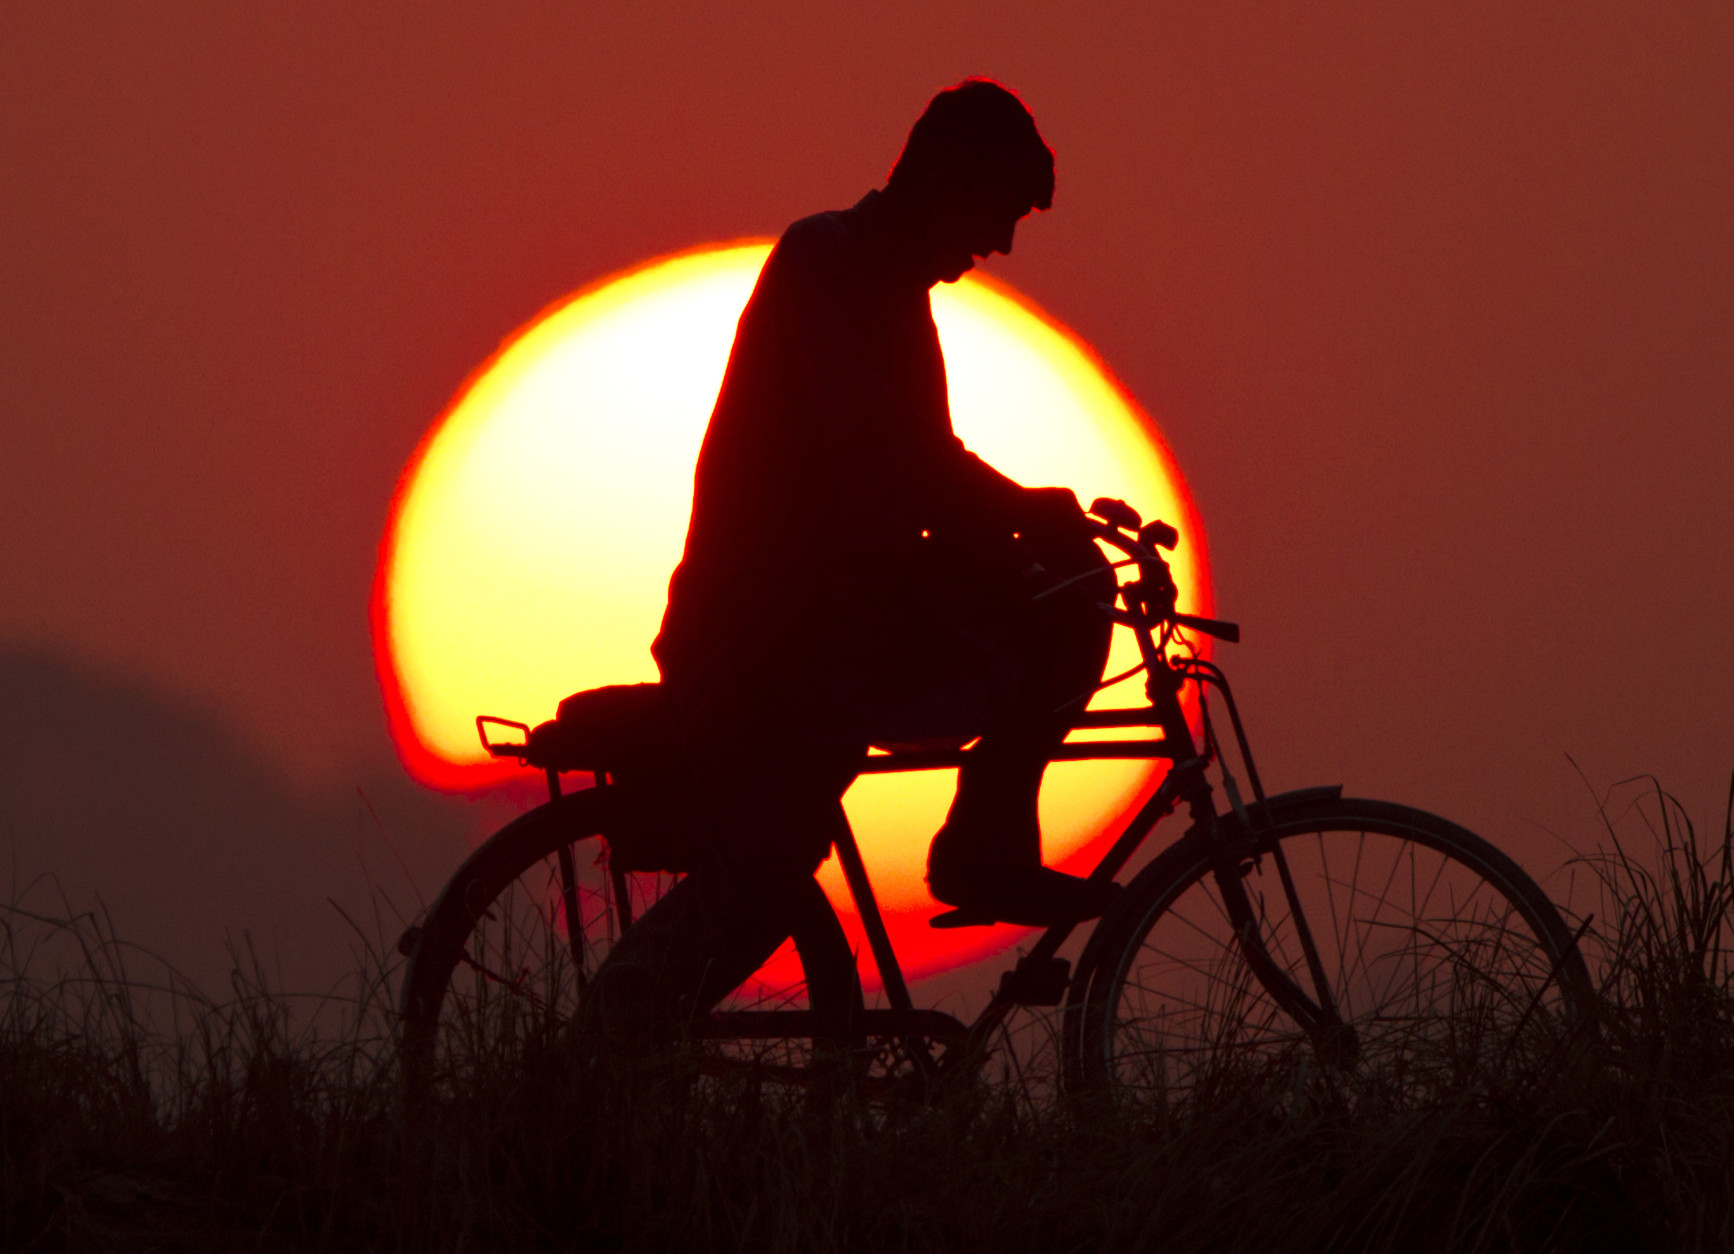 A Pakistani cyclist rides during the last sunset of the year on the outskirts of Islamabad, Pakistan, Wednesday, Dec. 31, 2014. (AP Photo/Anjum Naveed)